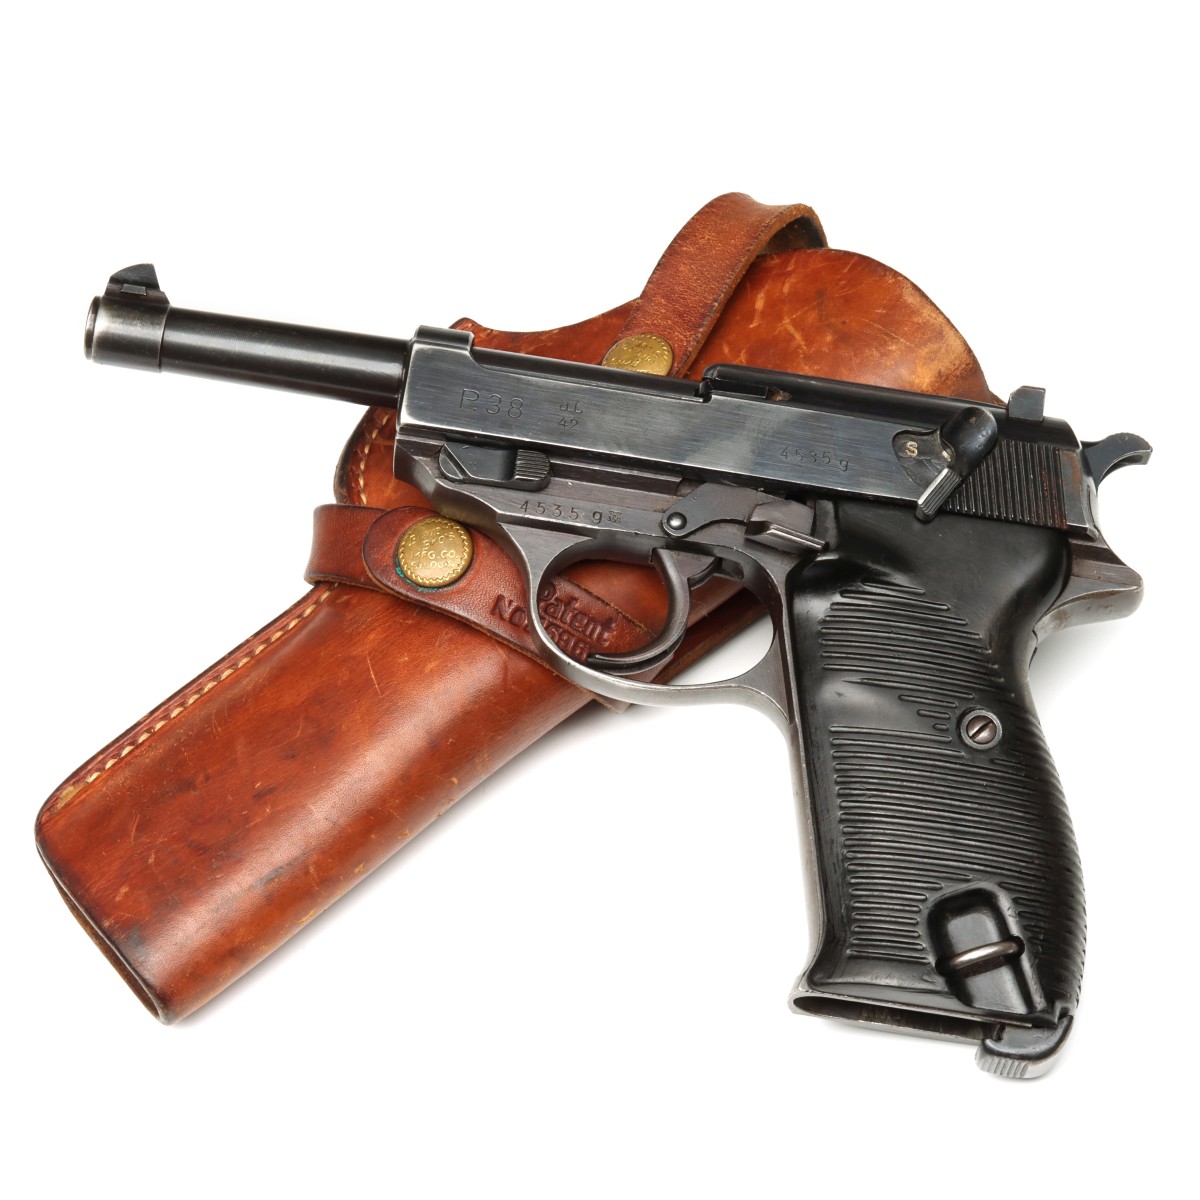 A WALTHER P38 9MM PISTOL WITH THIRD REICH PROOF MARKS